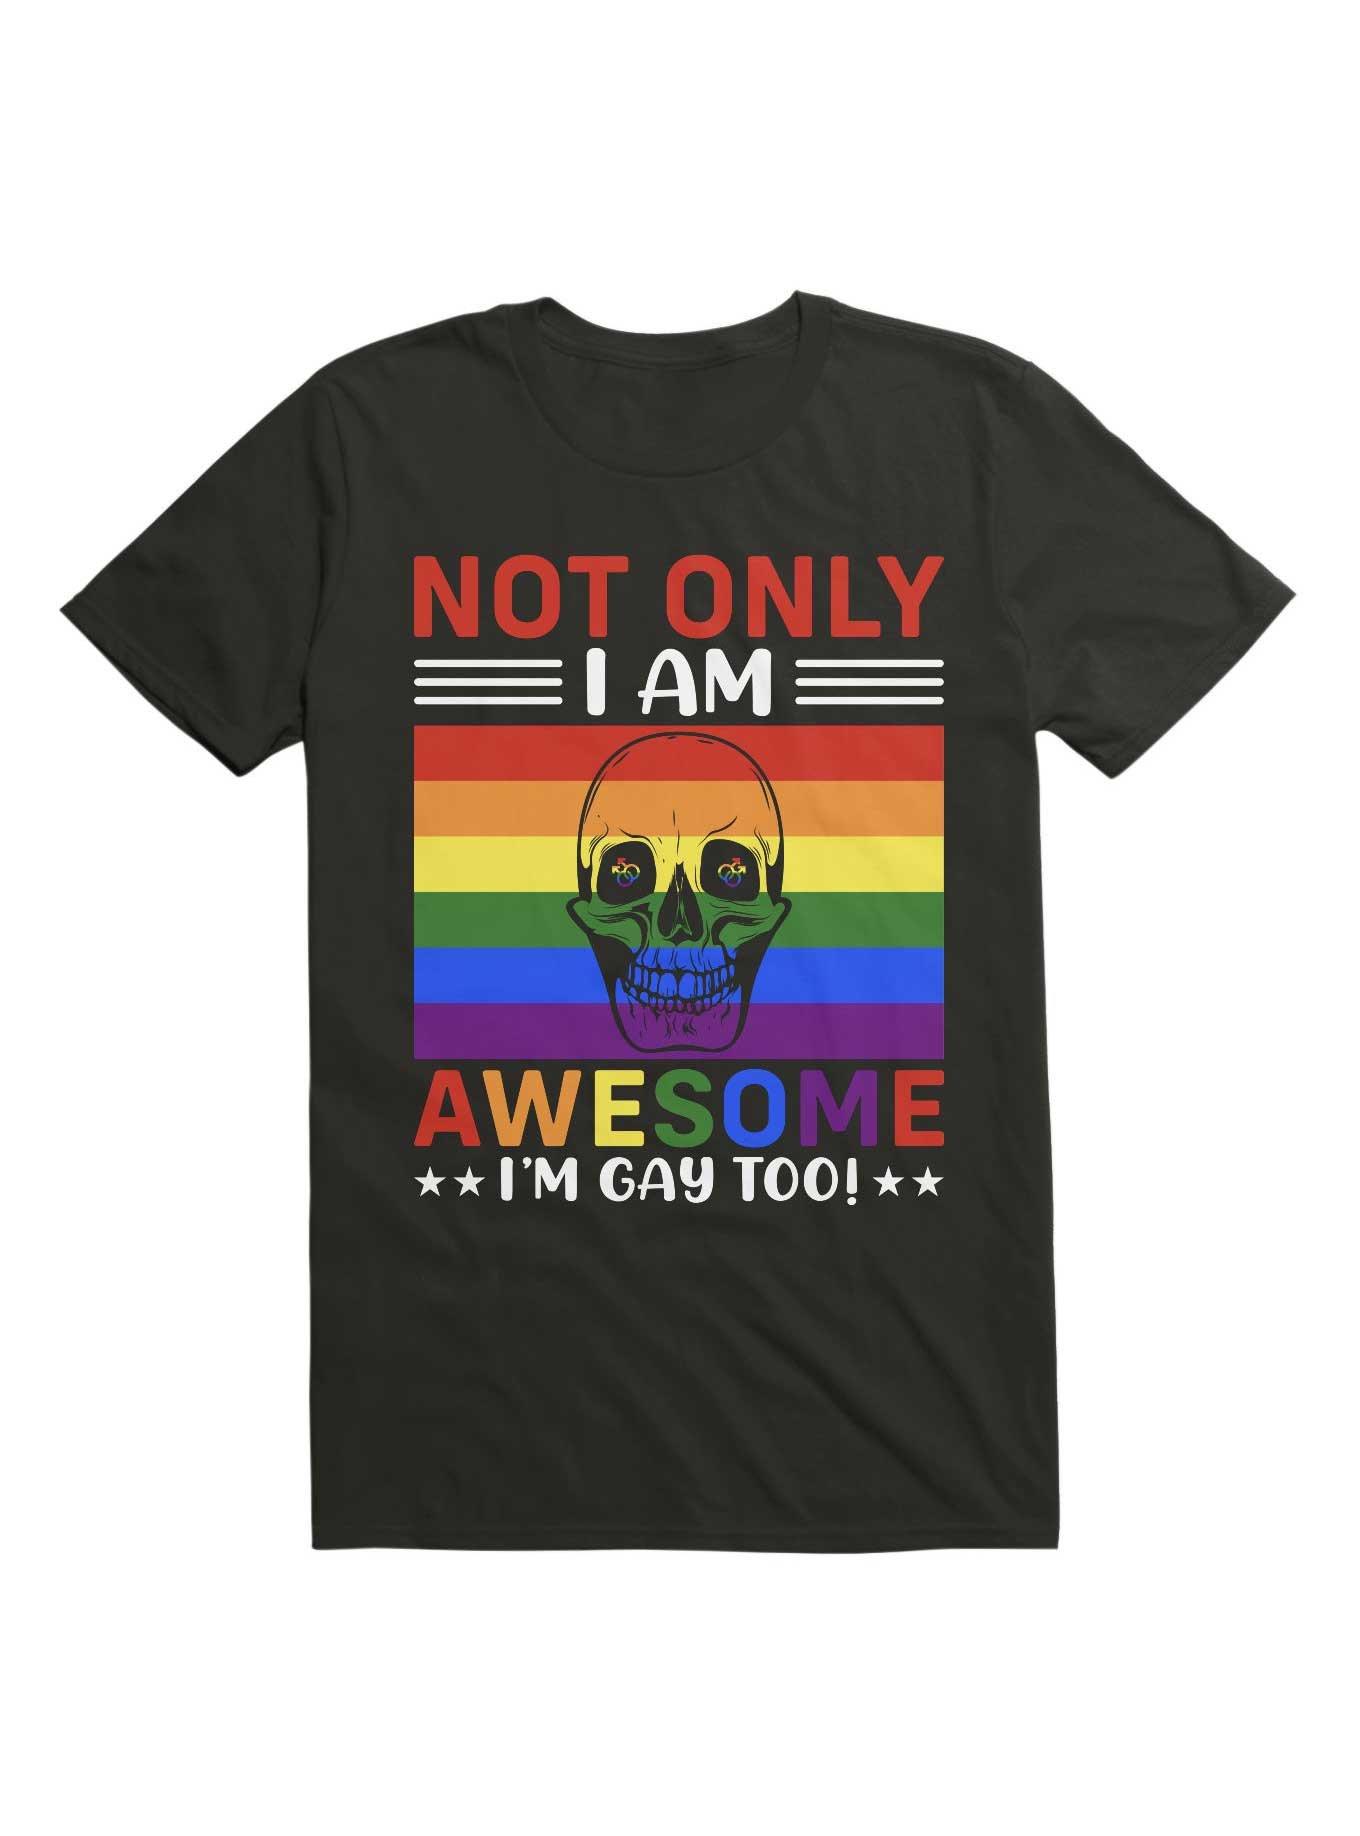 Not Only I'm Gay I Am Awesome Too! T-Shirt